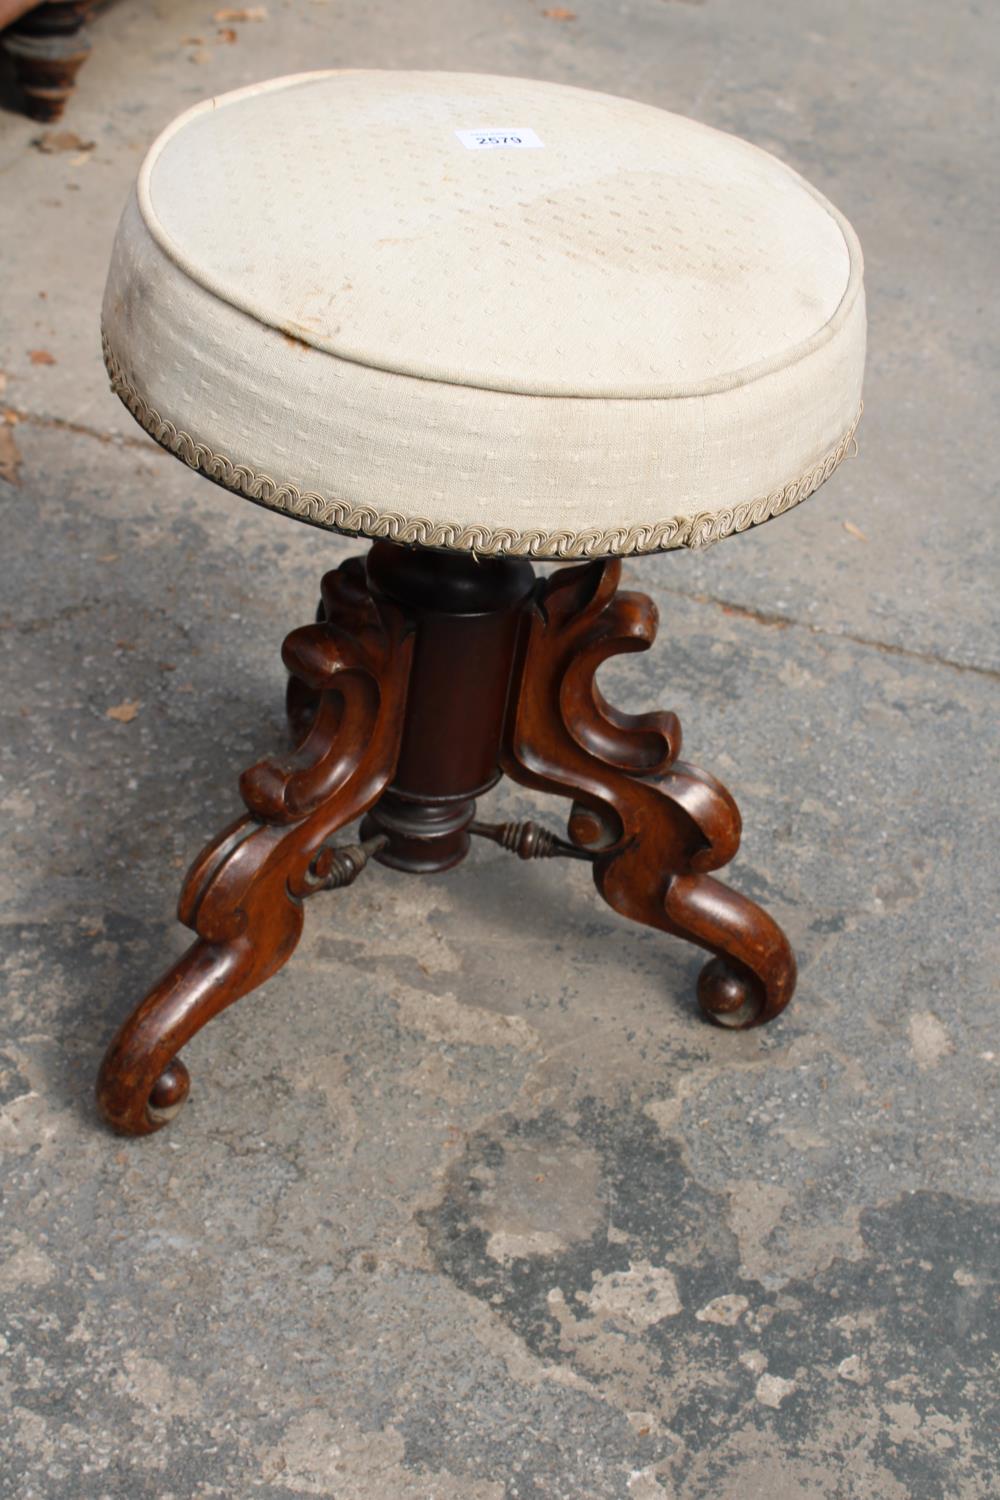 A VICTORIAN LOW WALNUT STOOL WITH UPHOLSTERED TOP